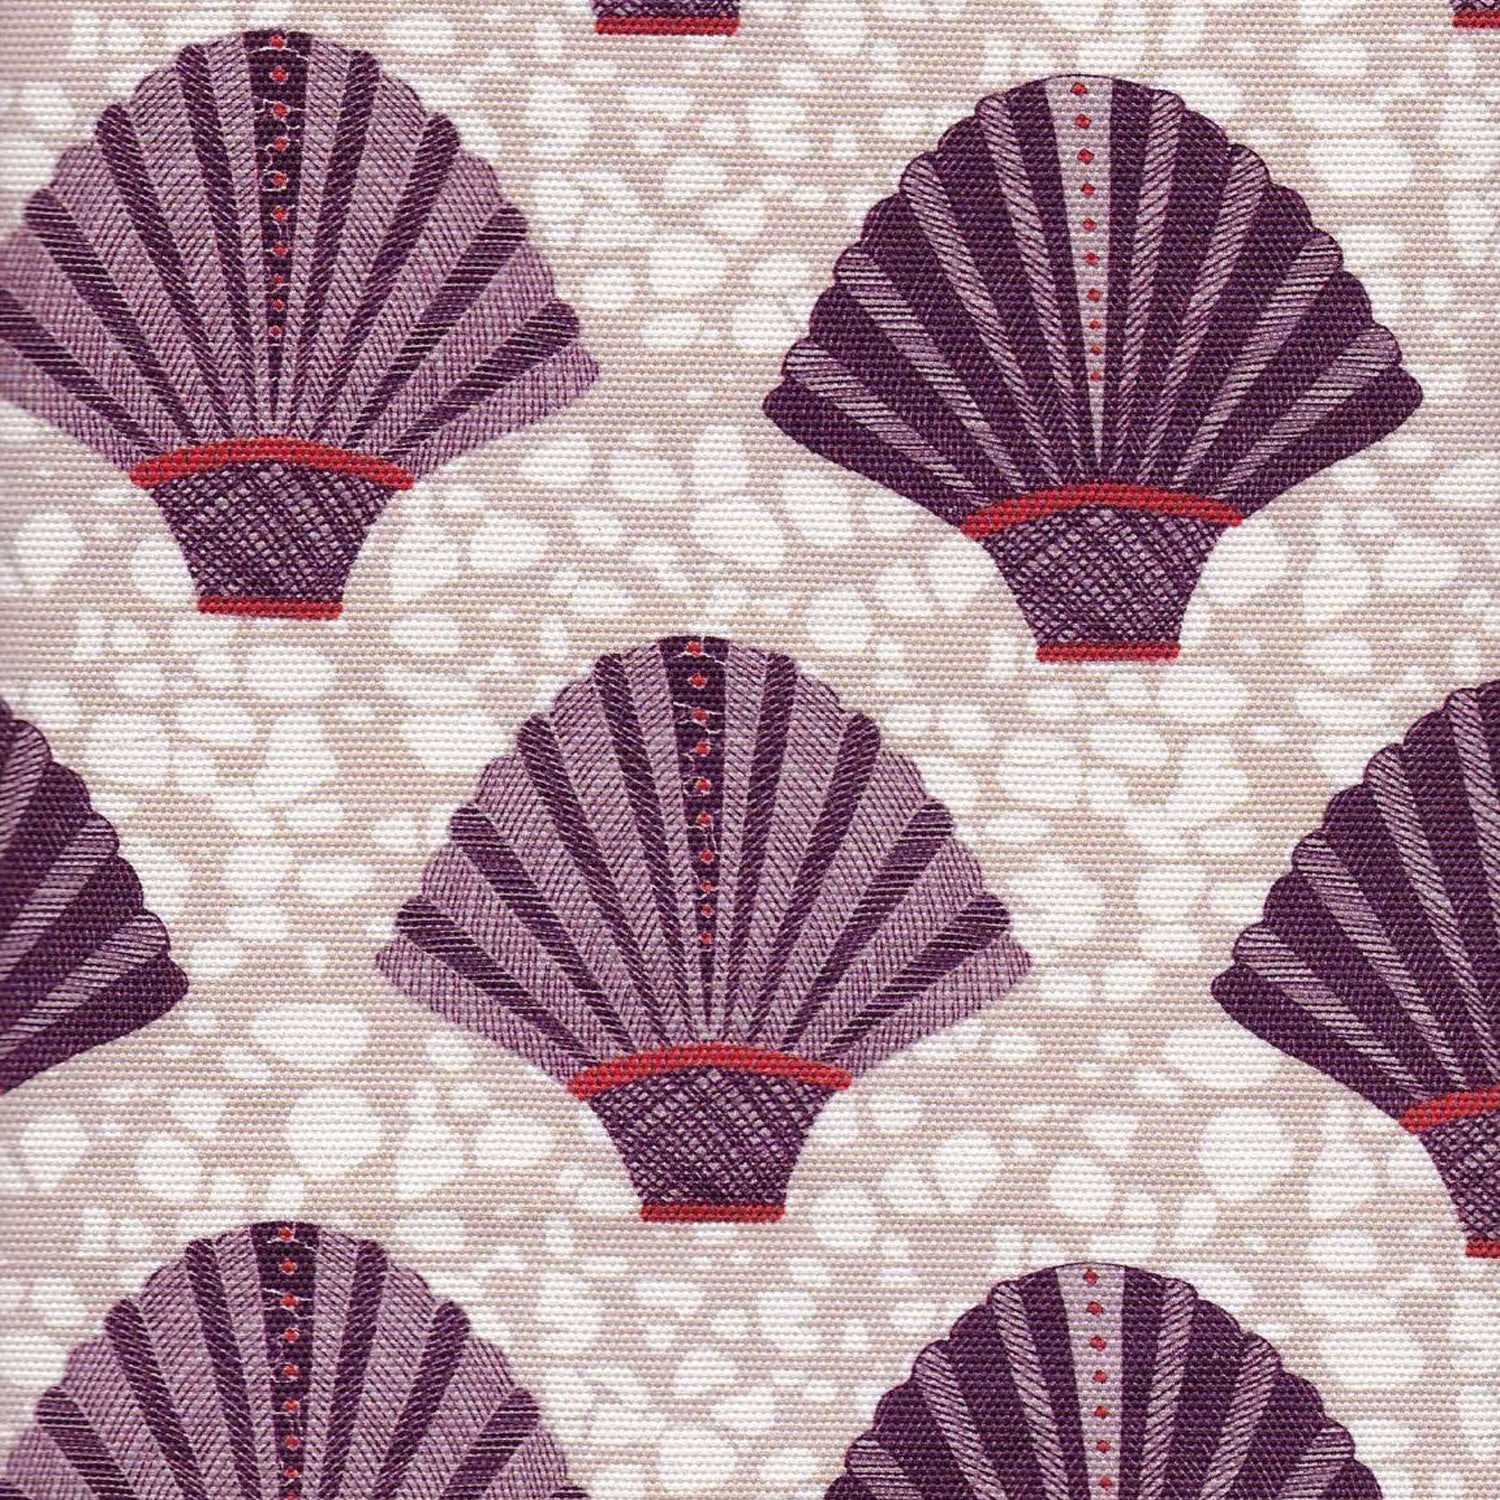 Detail of fabric in a playful fan print in purple and red on a mottled cream field.